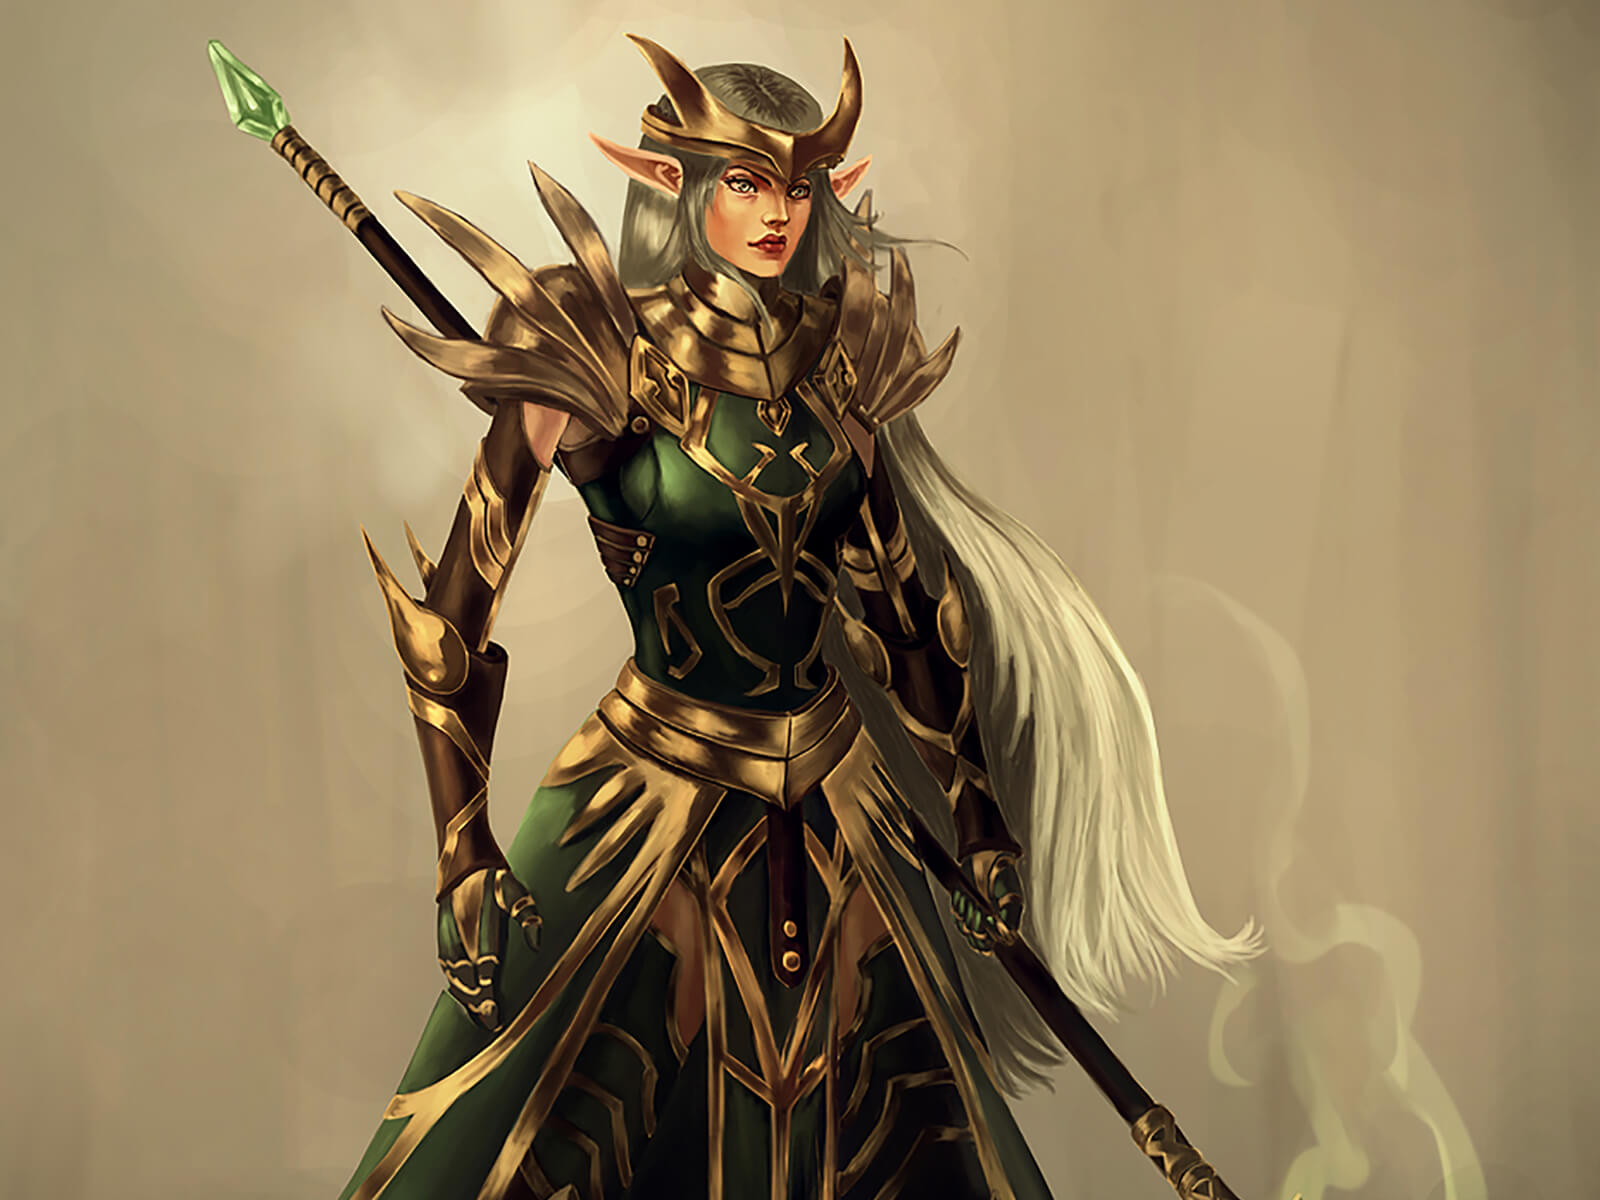 An elvish warrior stands in ornate green and gold armor holding a long staff topped by an emerald gem wafting magical vapors.